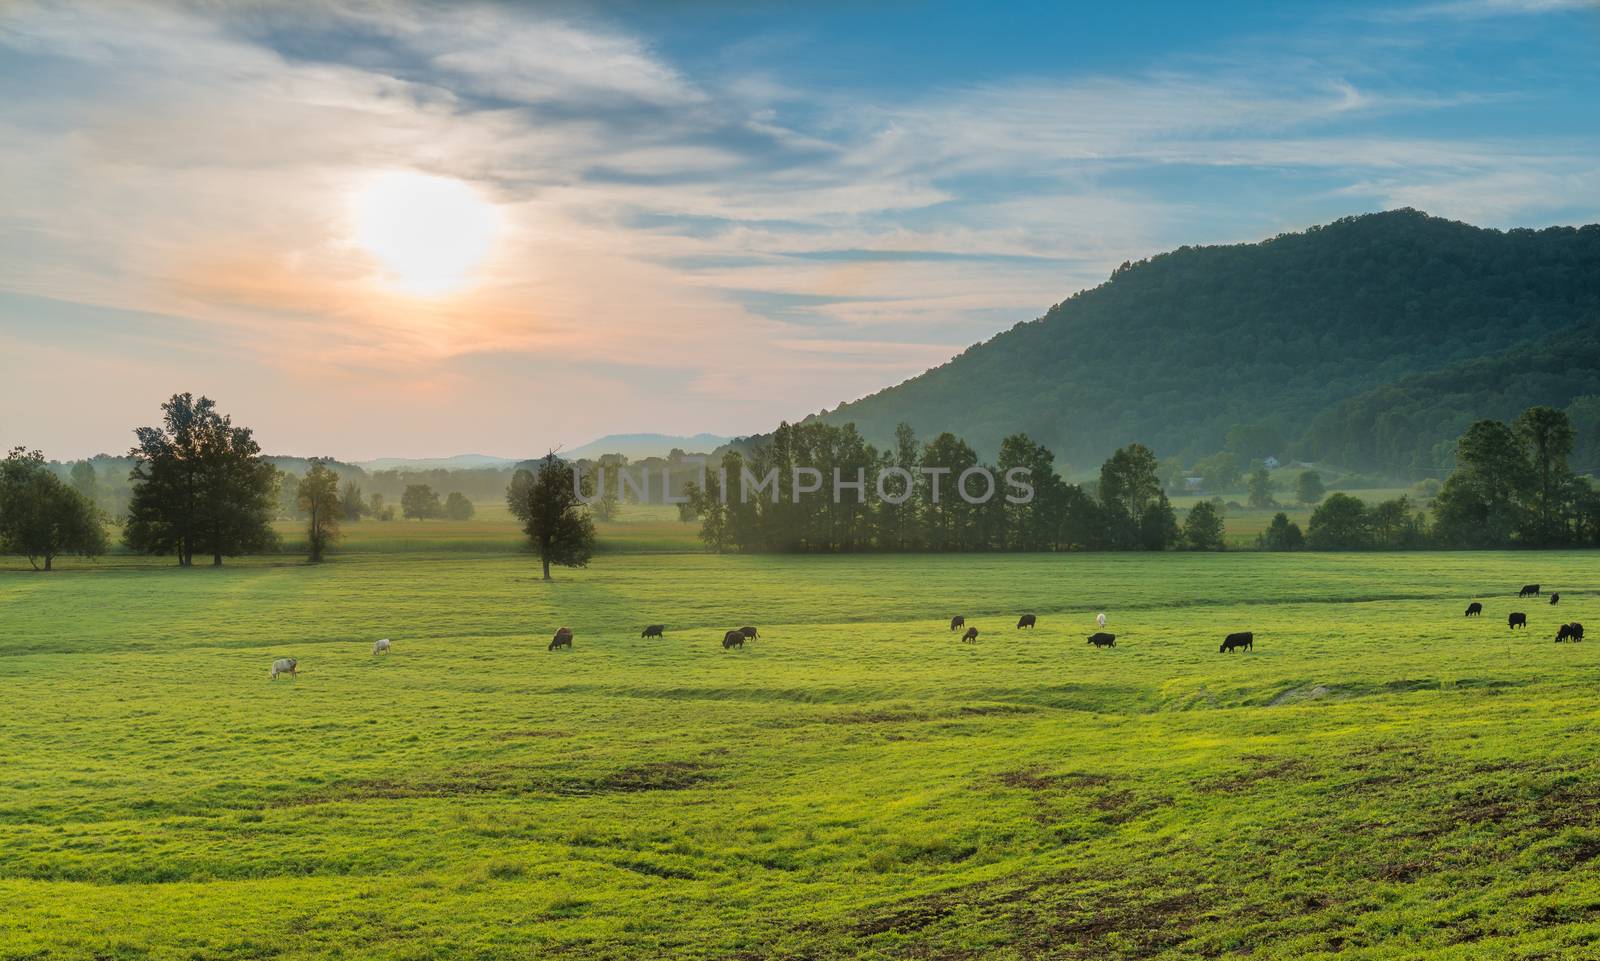 Cows grazing at sunset with mountains in the distant.